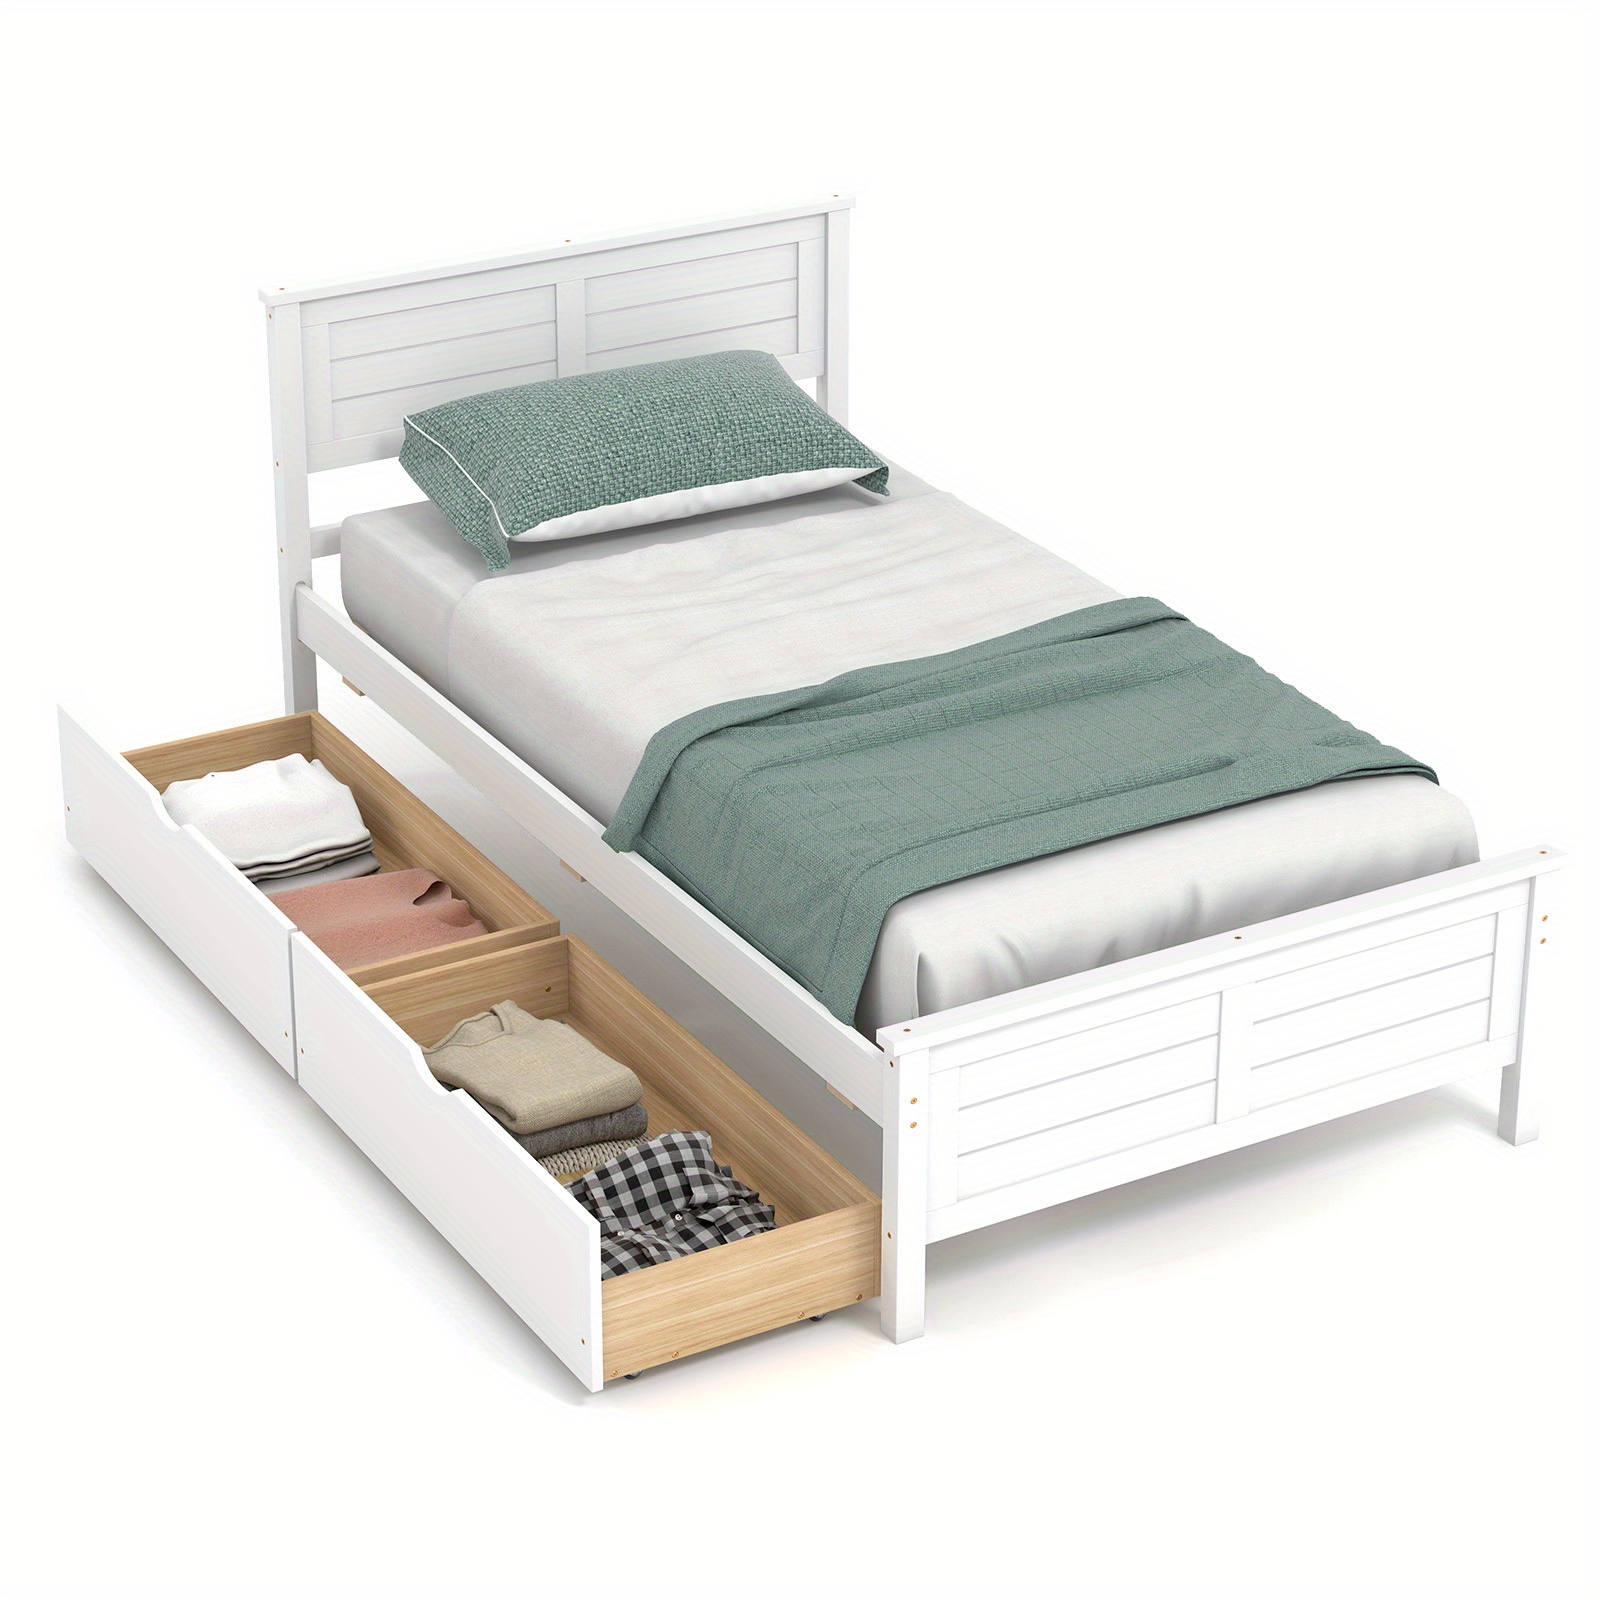 

Twin Wooden Platform Bed Frame With 2 Storage Drawers Slats Support White